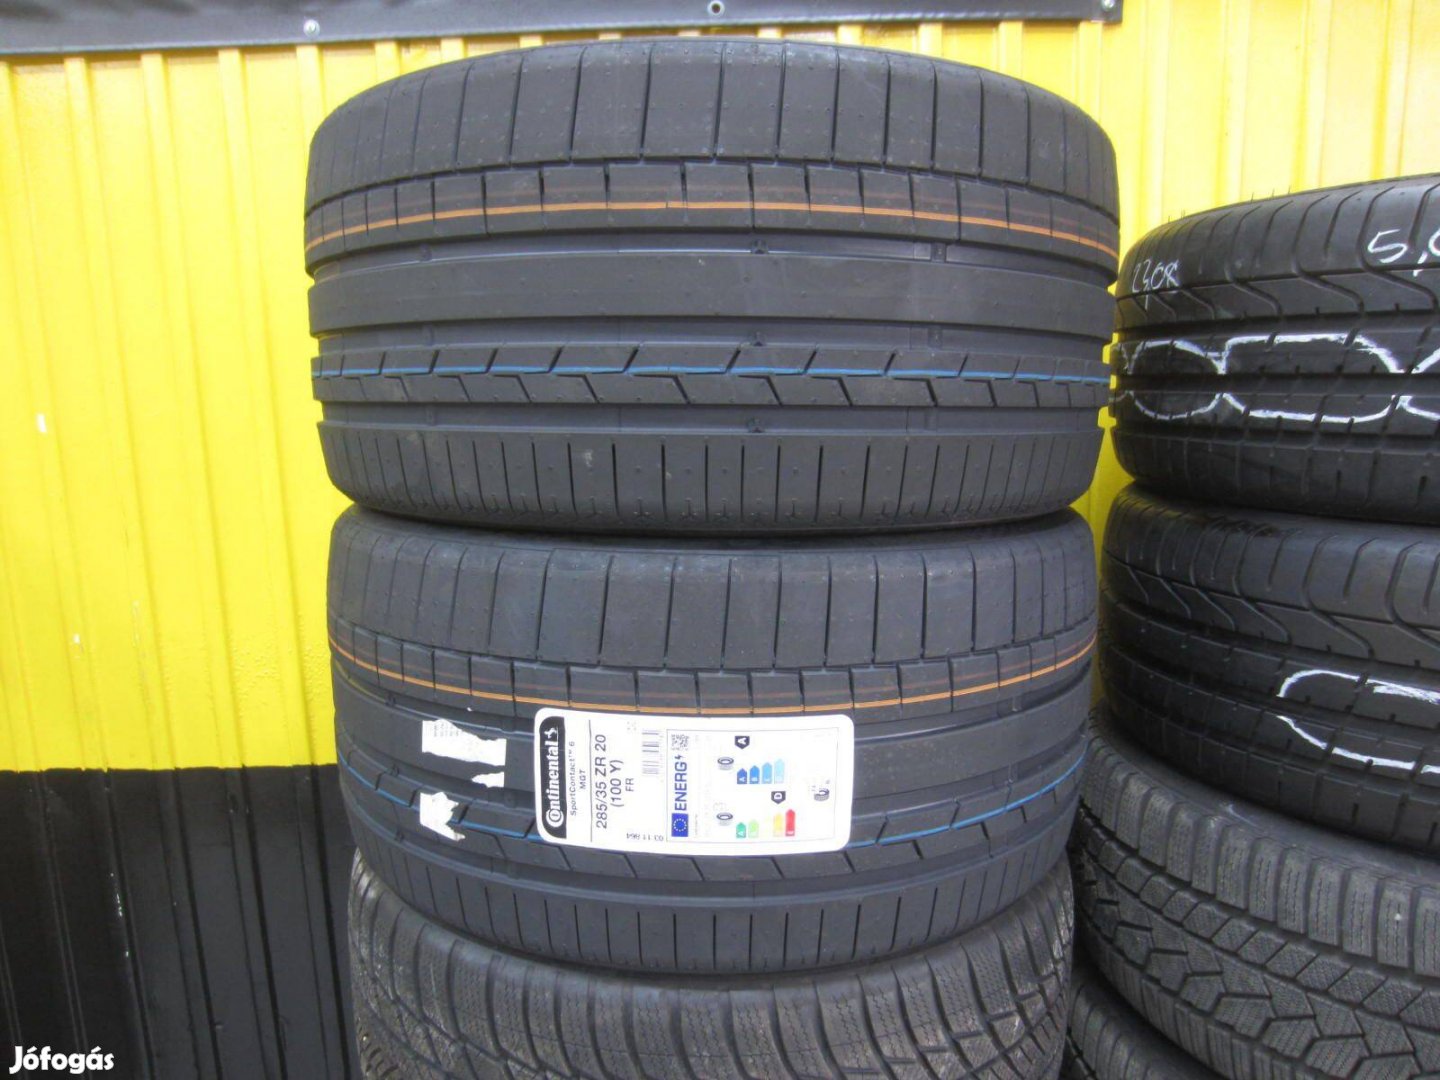 285/35 R20 Continental Sportcontact6 100Y